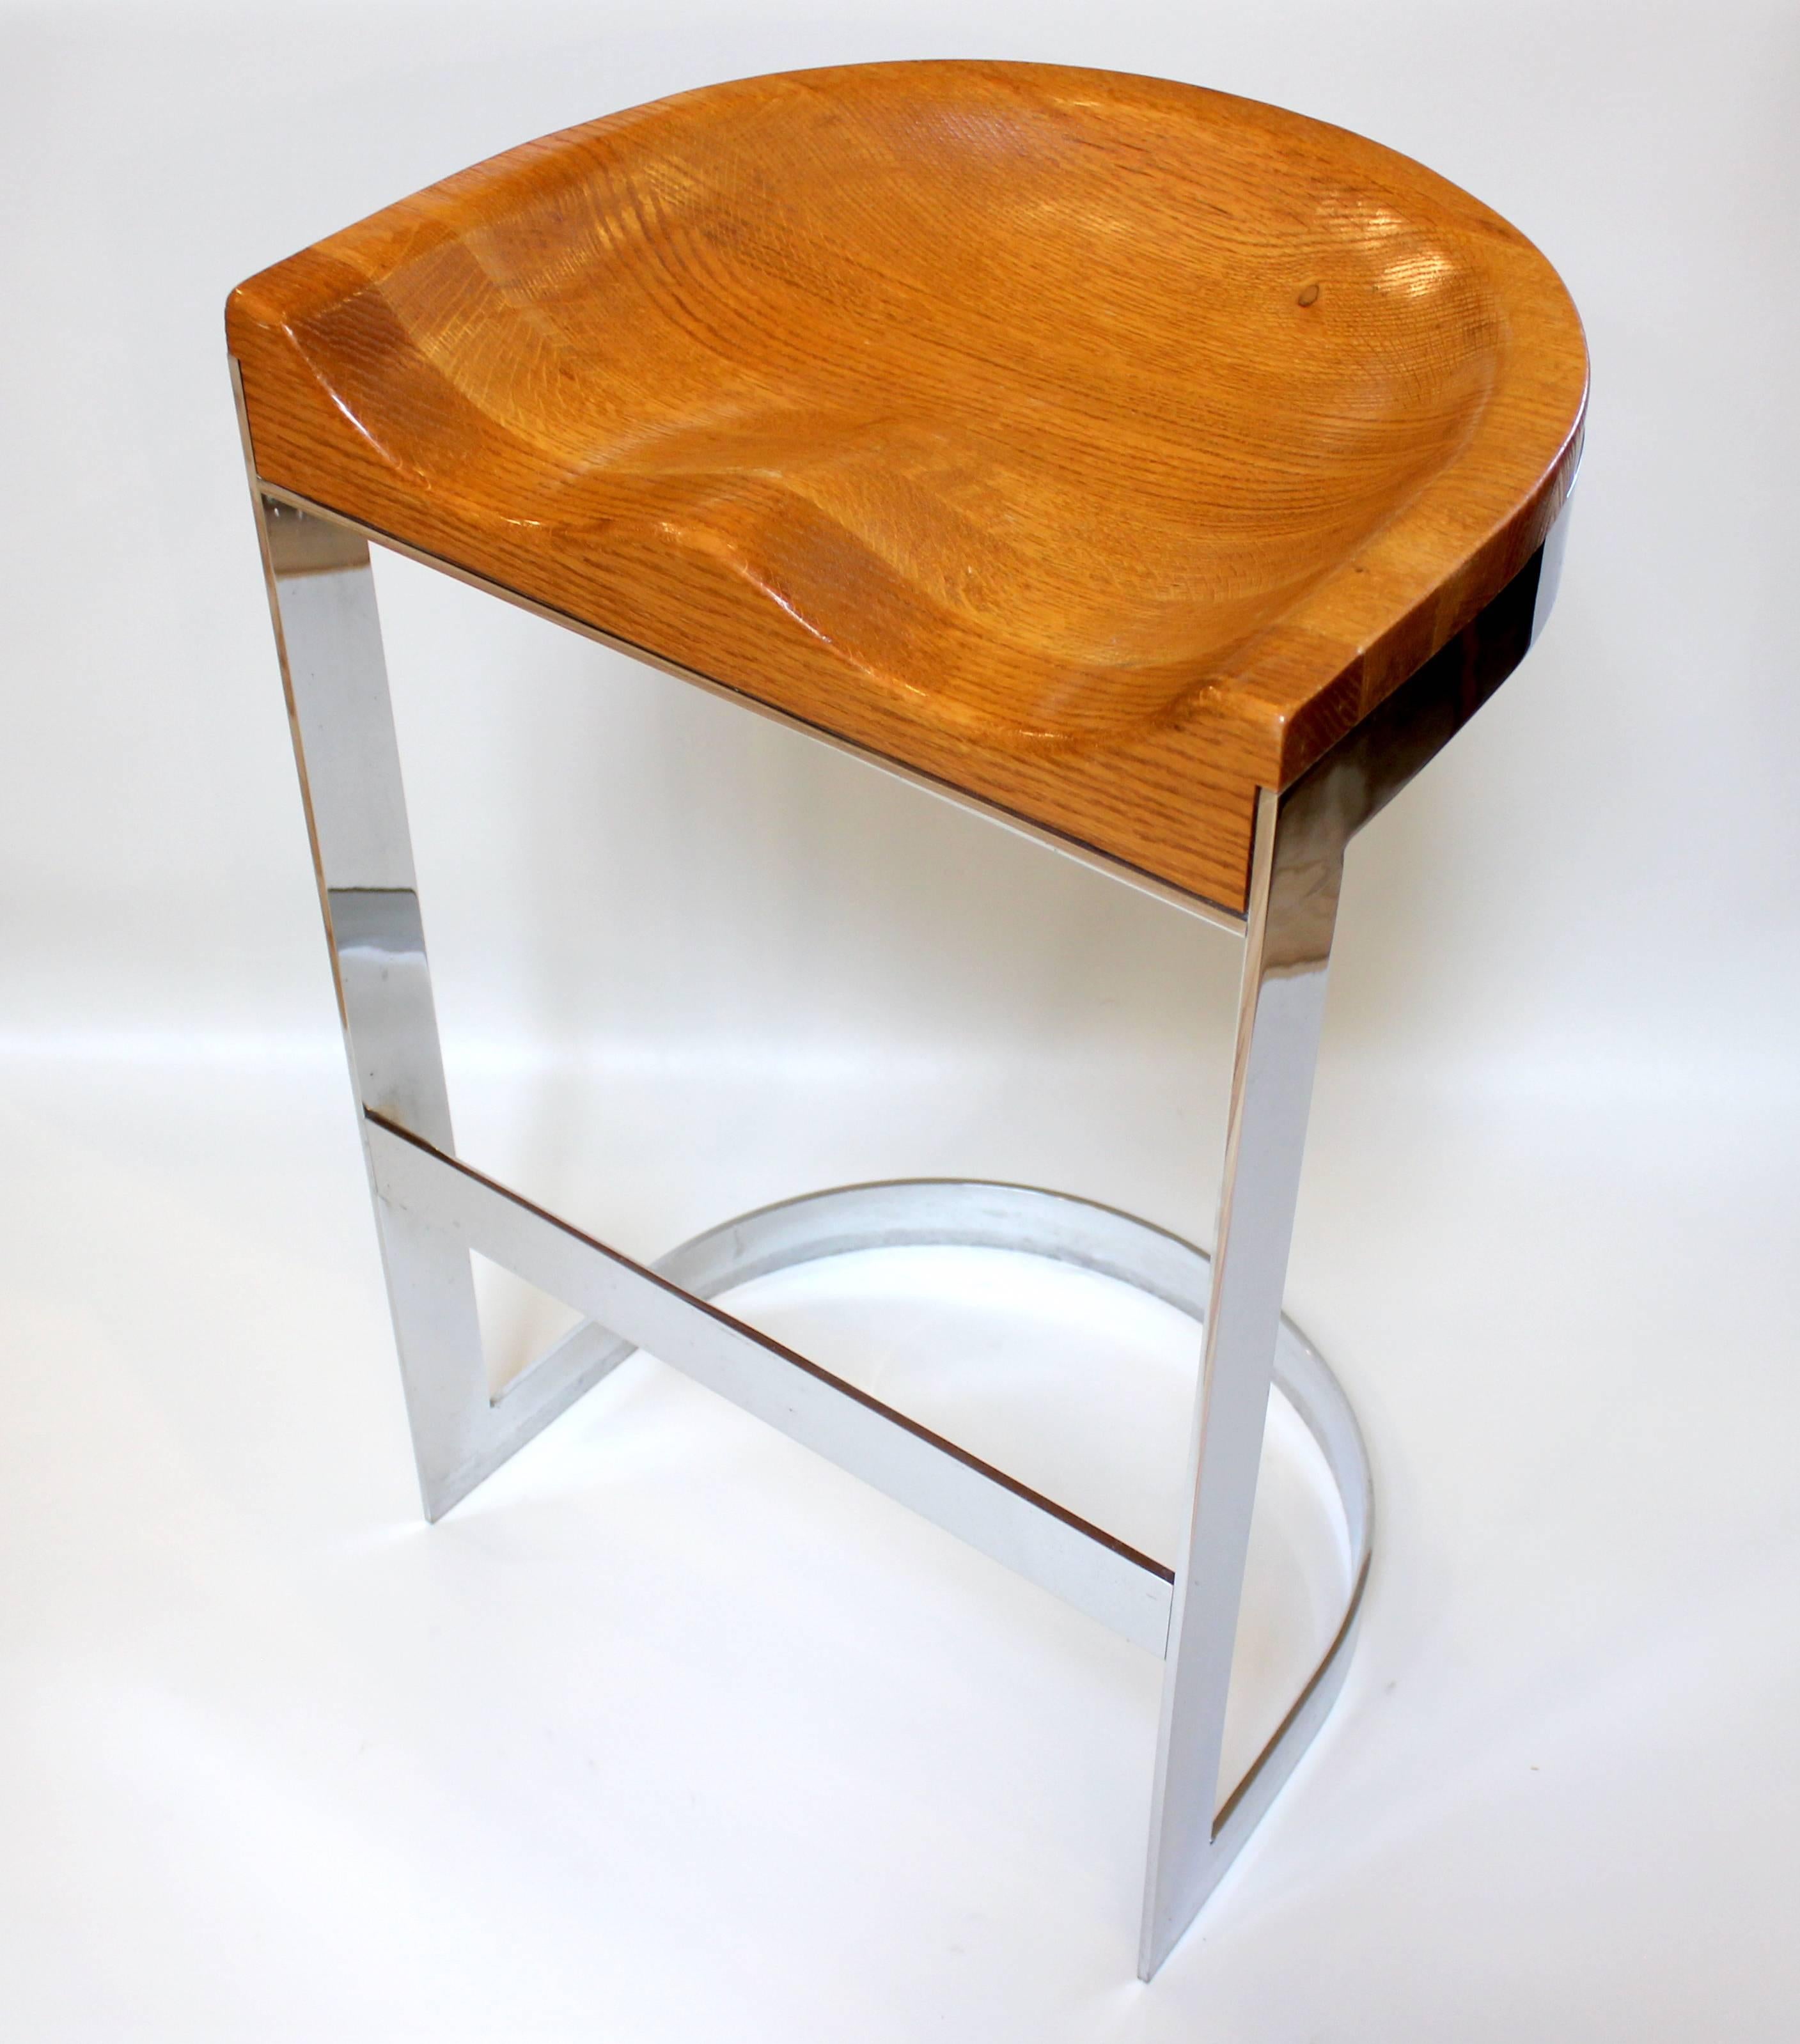 Chrome bar stool with sculpted oak seat designed by William Bacon, circa 1970.